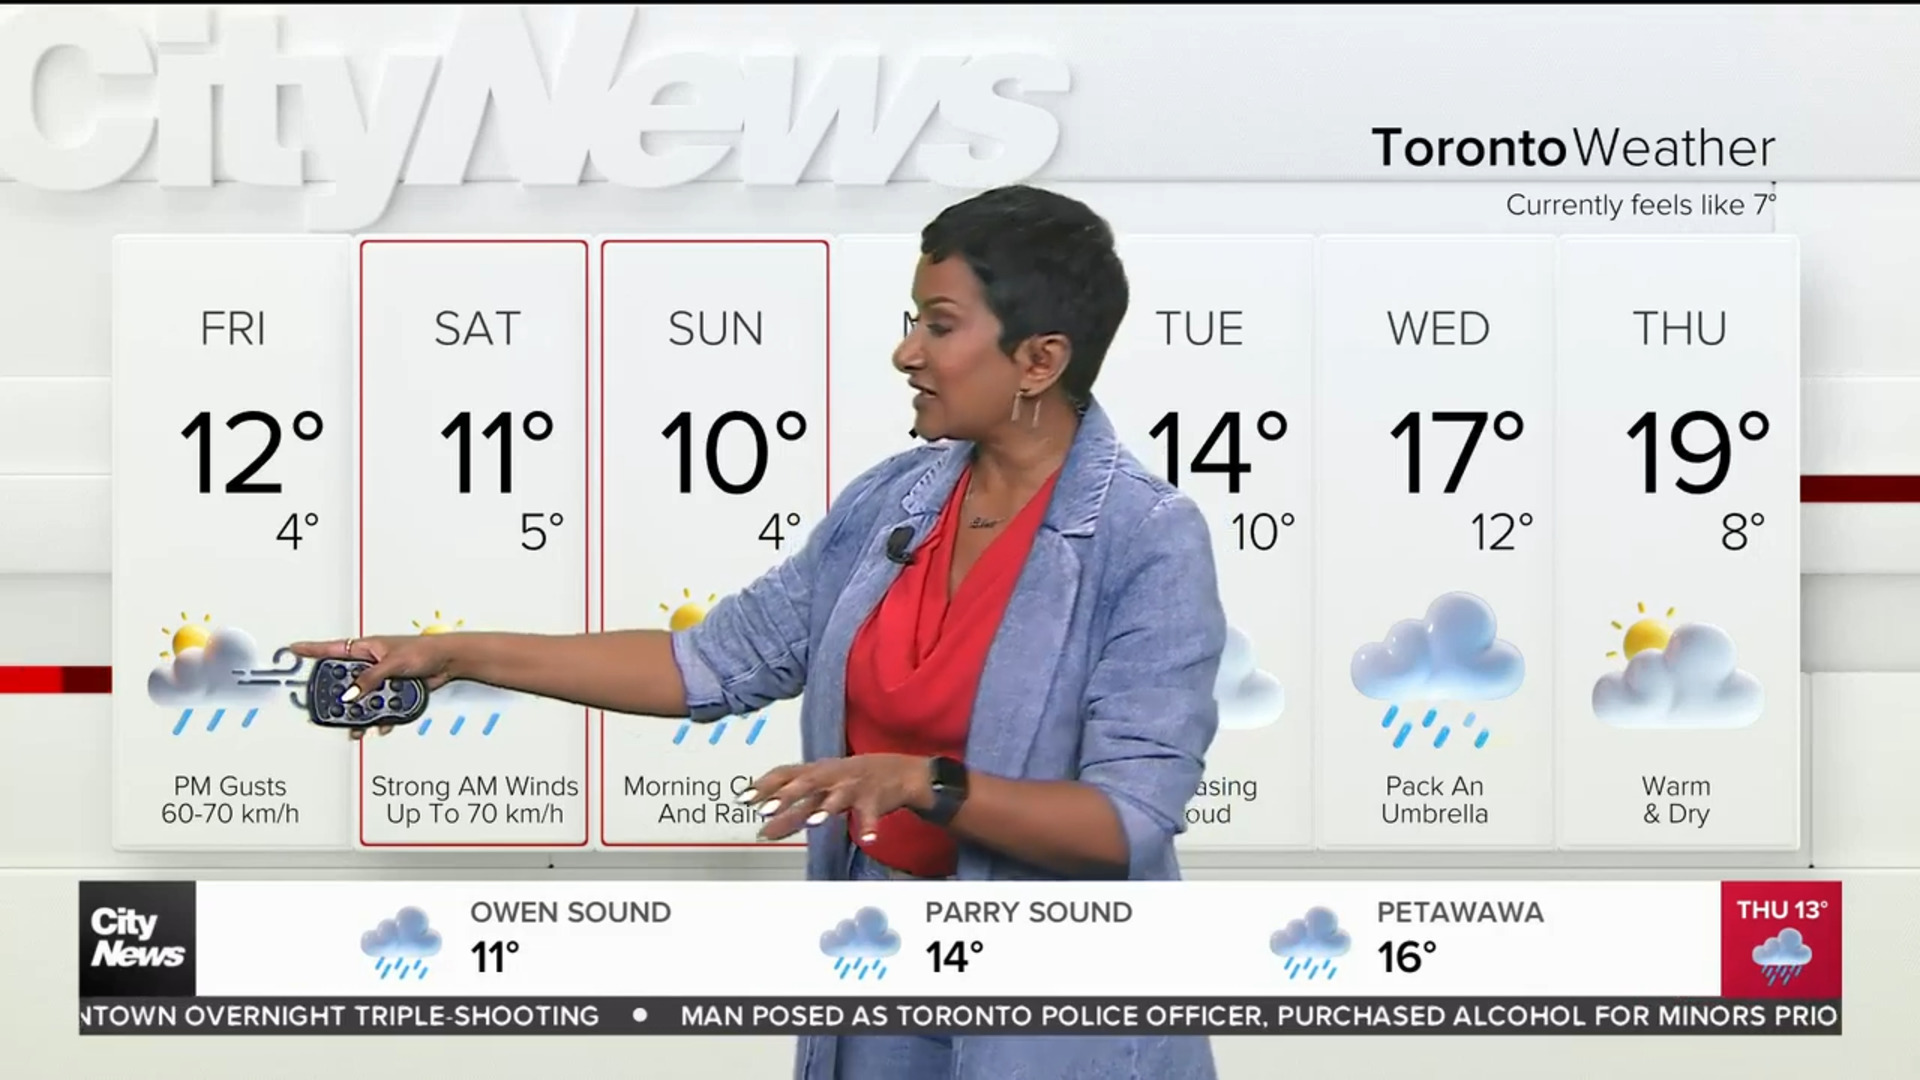 More rain with possible flurries to start the weekend